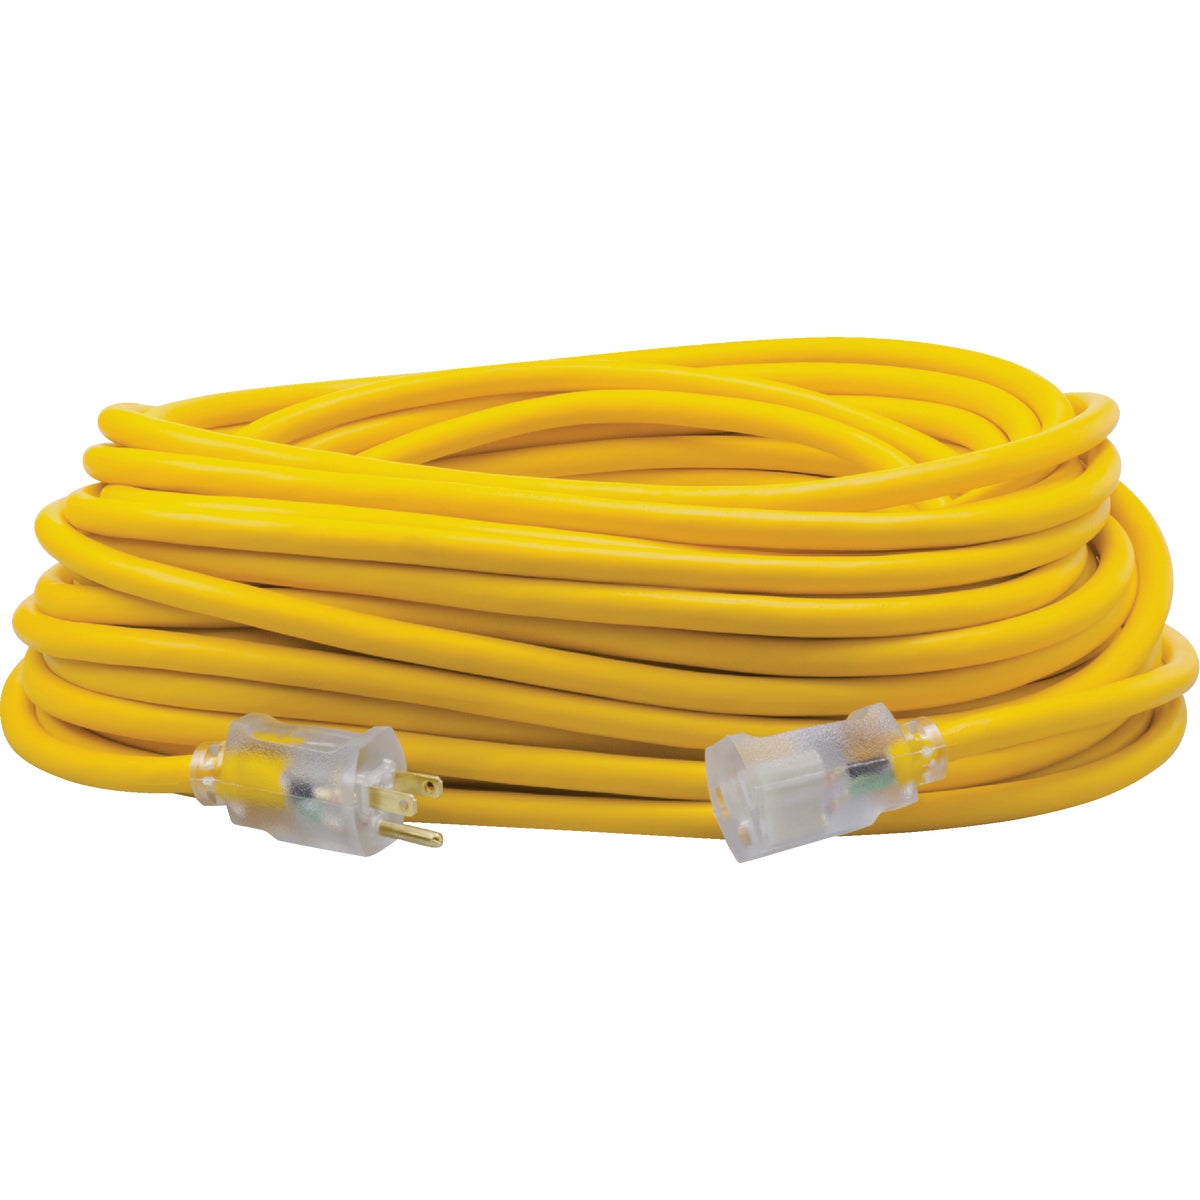 Item 562813, Heavy-duty cold weather extension cord.